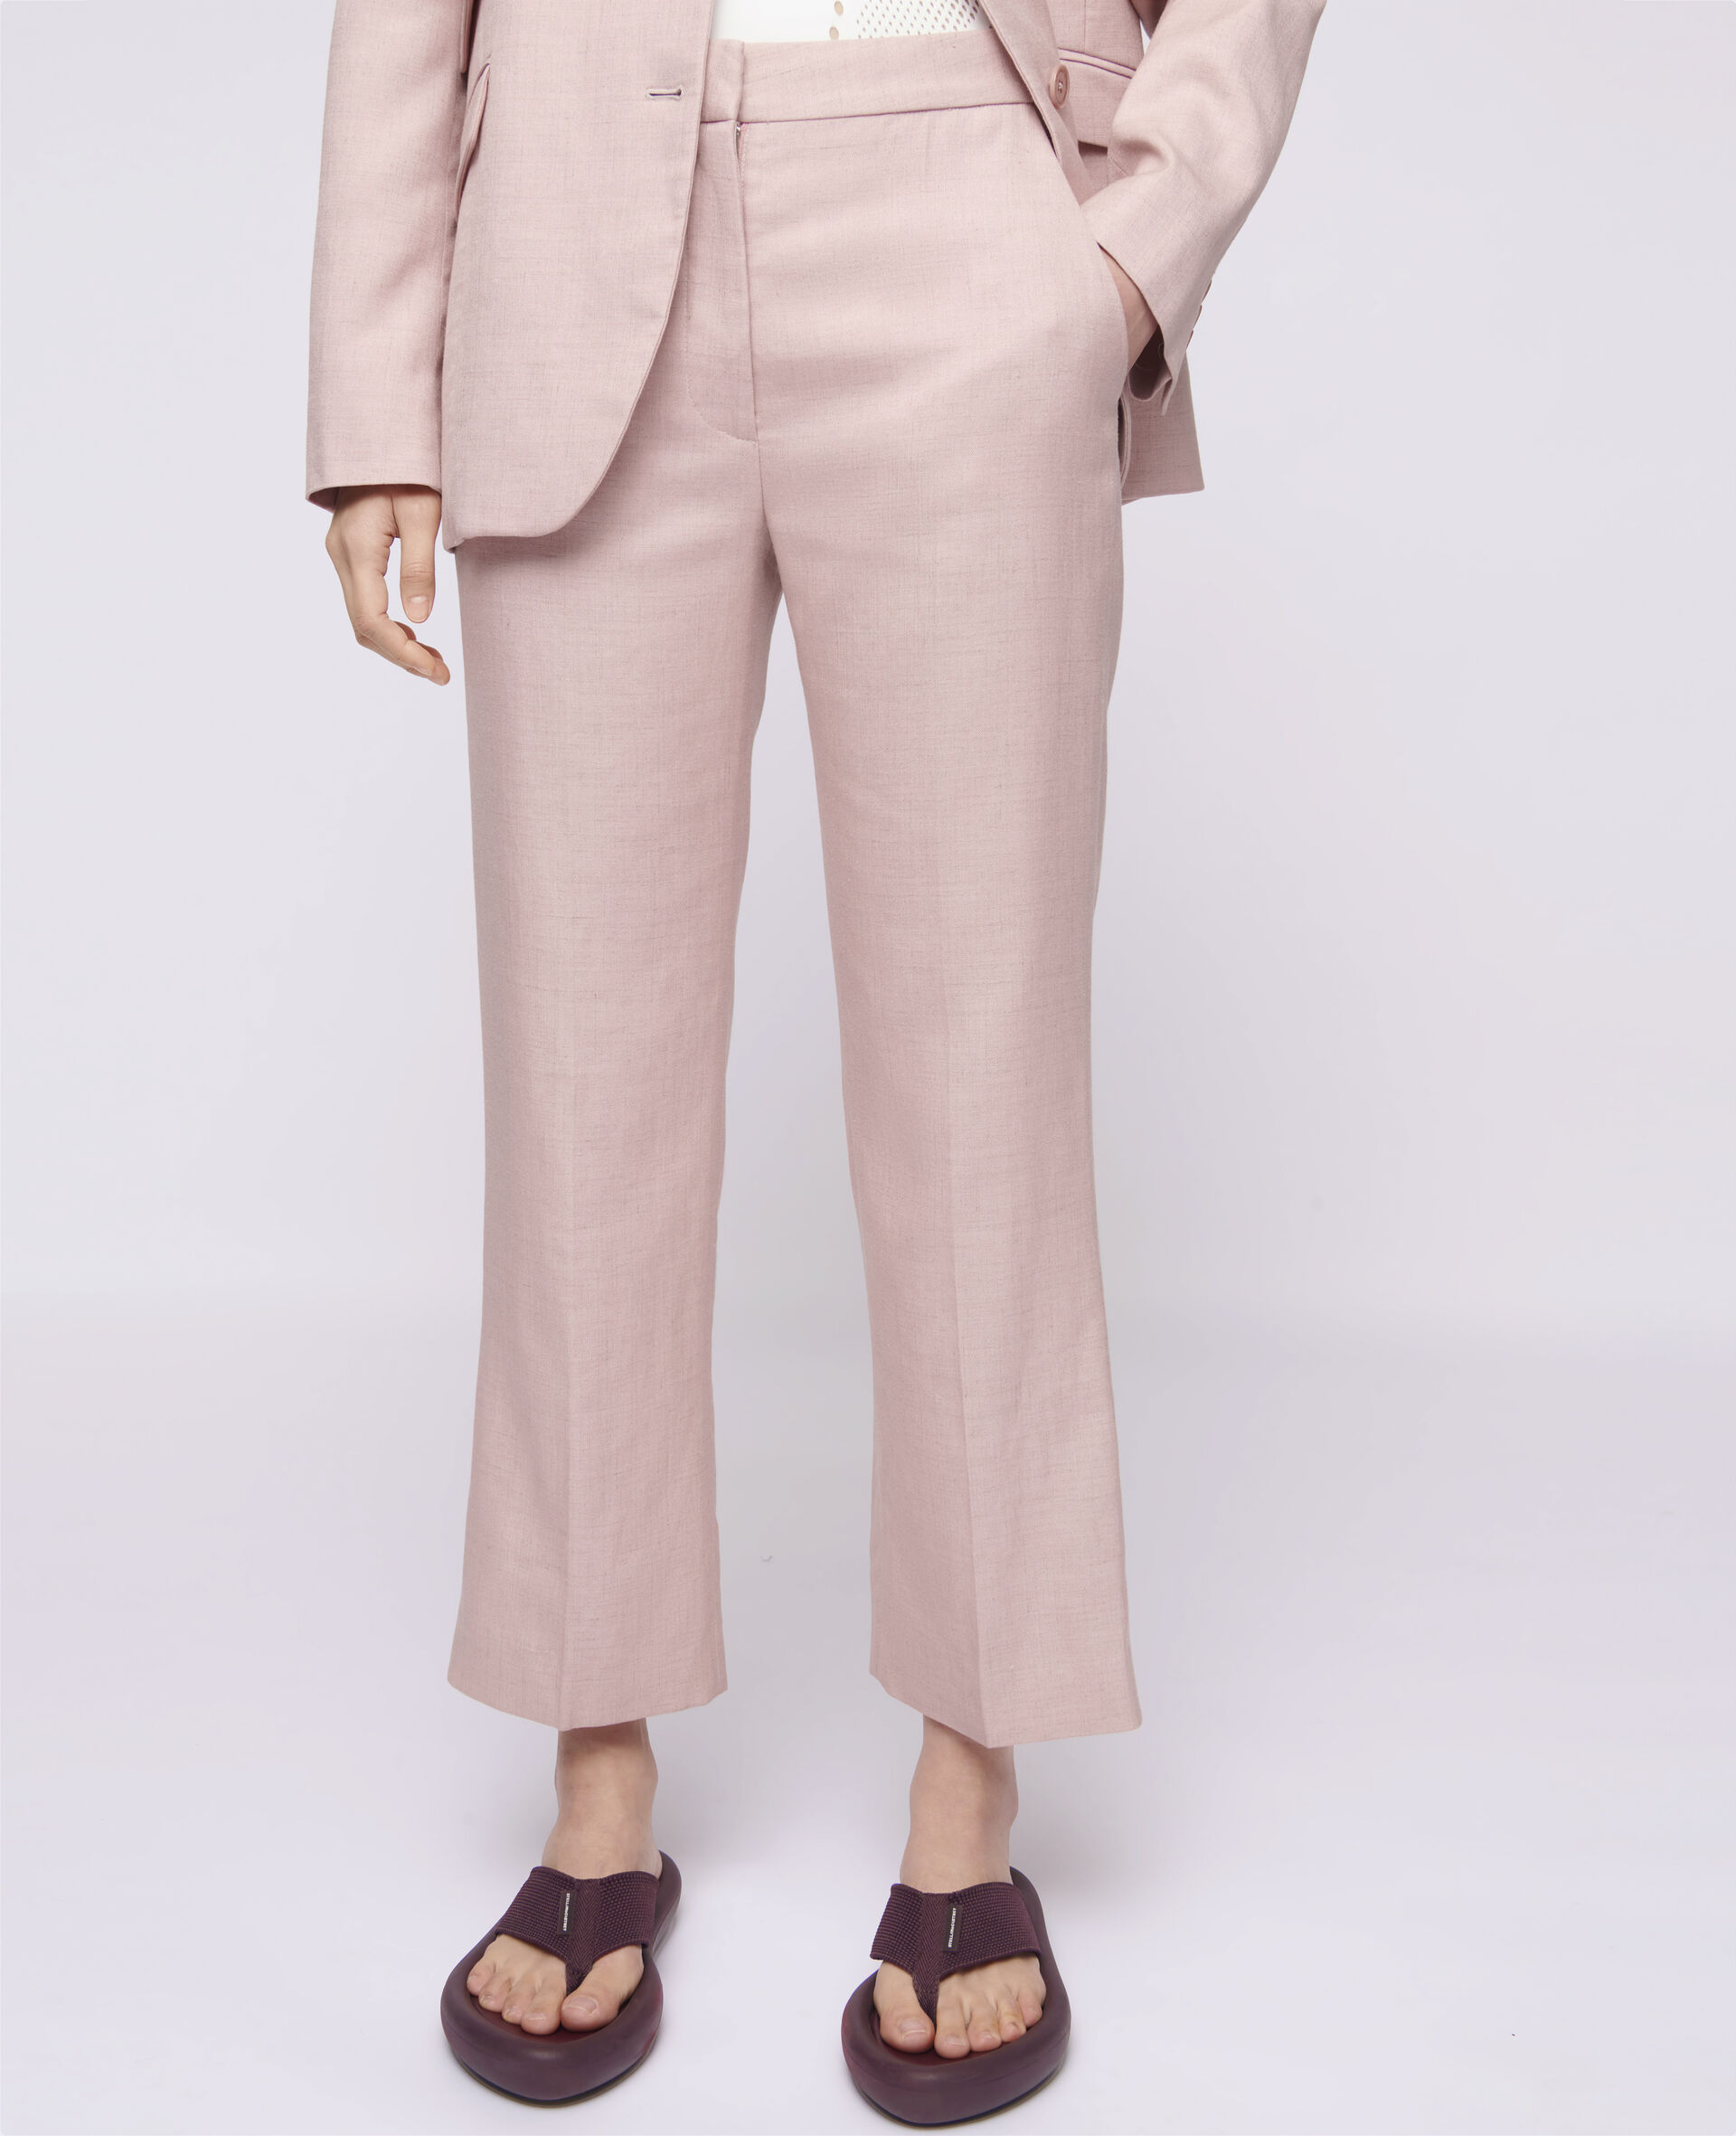 Carlie Tailored Pants-Pink-large image number 3